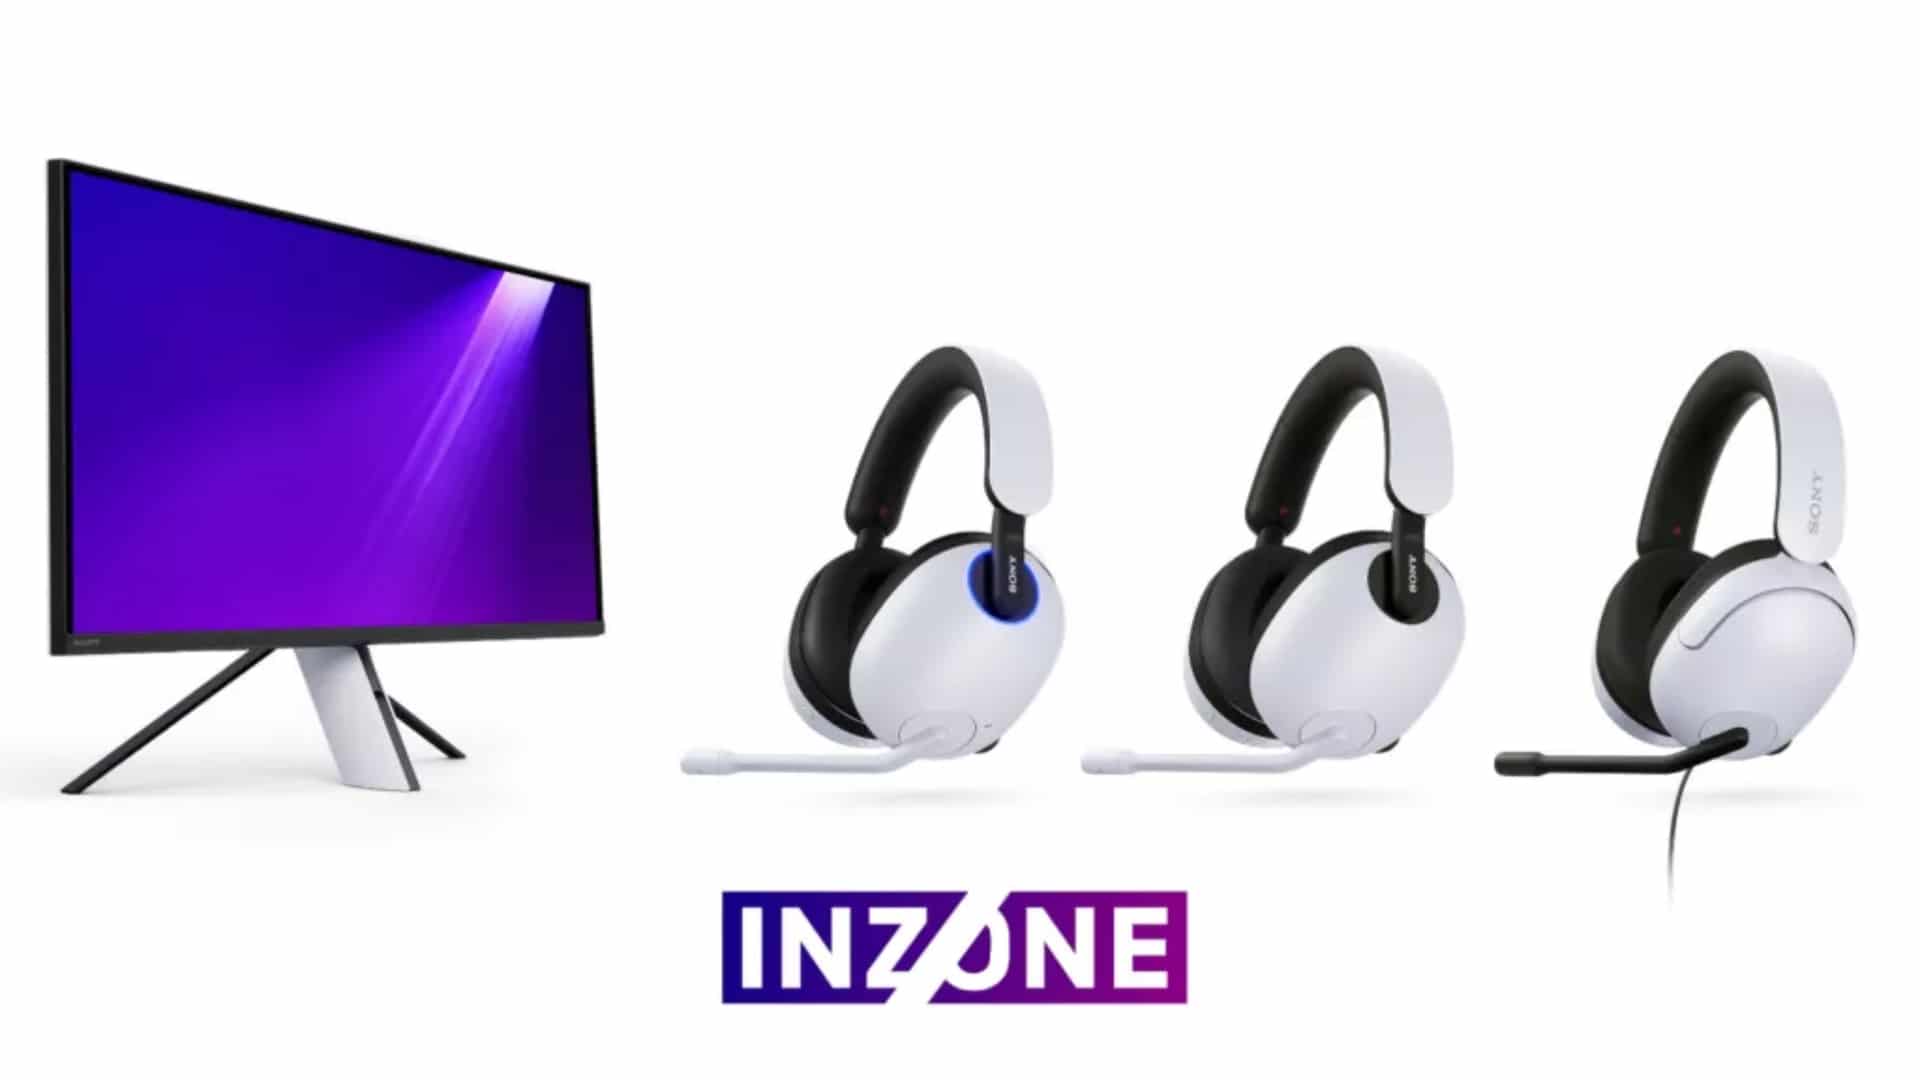 sony-unveils-inzone-gaming-monitor-and-headset-line-with-ps5-GamersRD